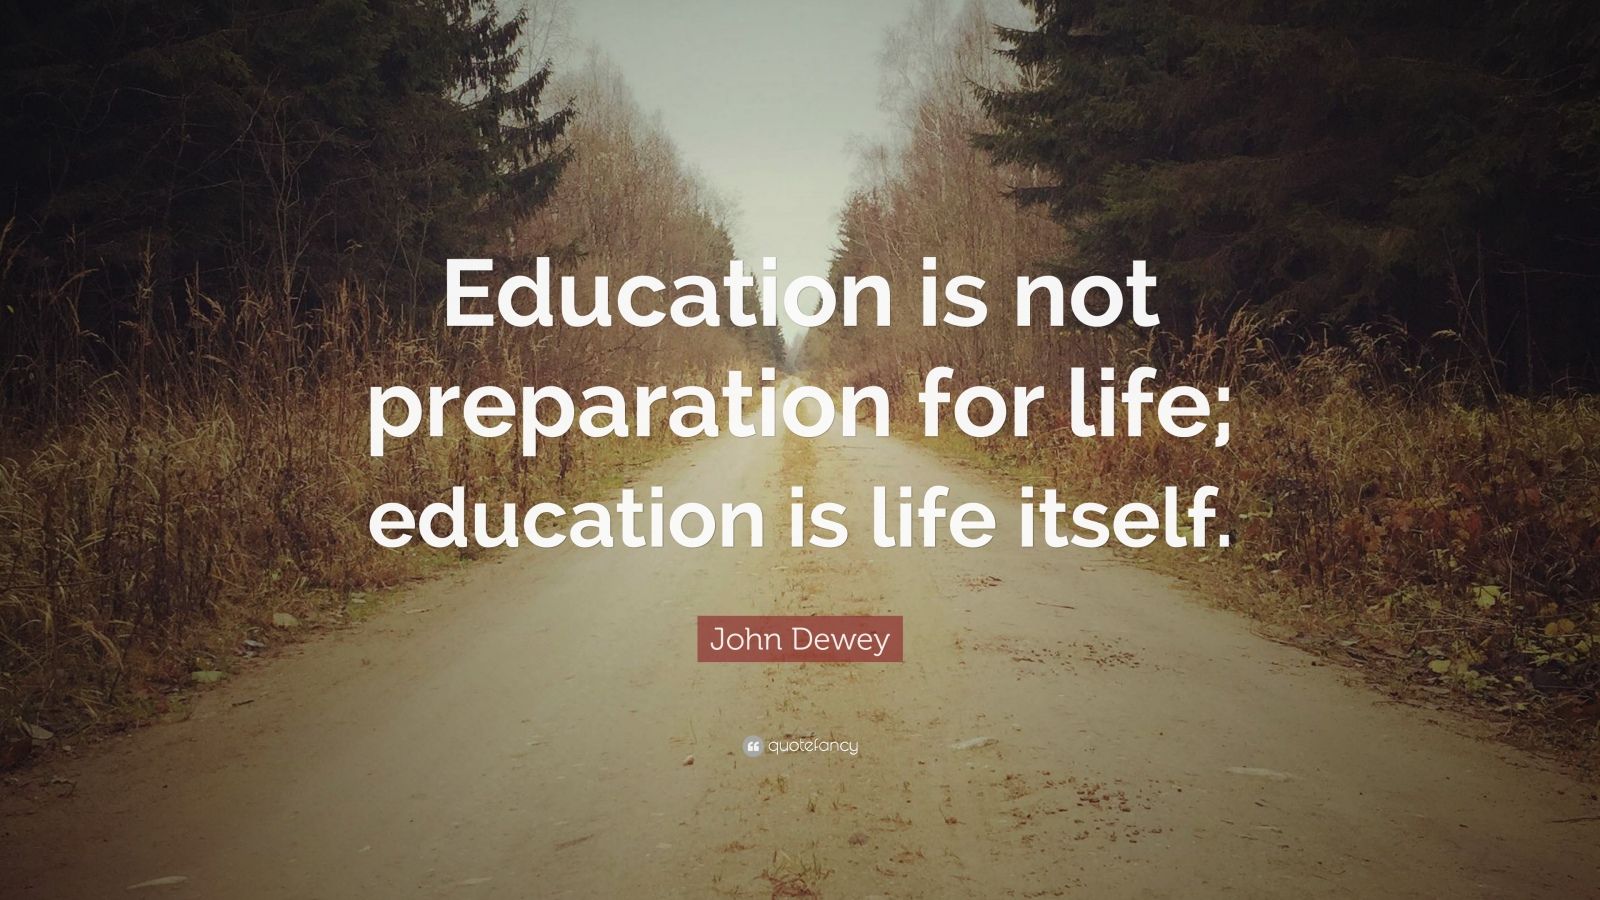 John Dewey Quote: “Education is not preparation for life; education is